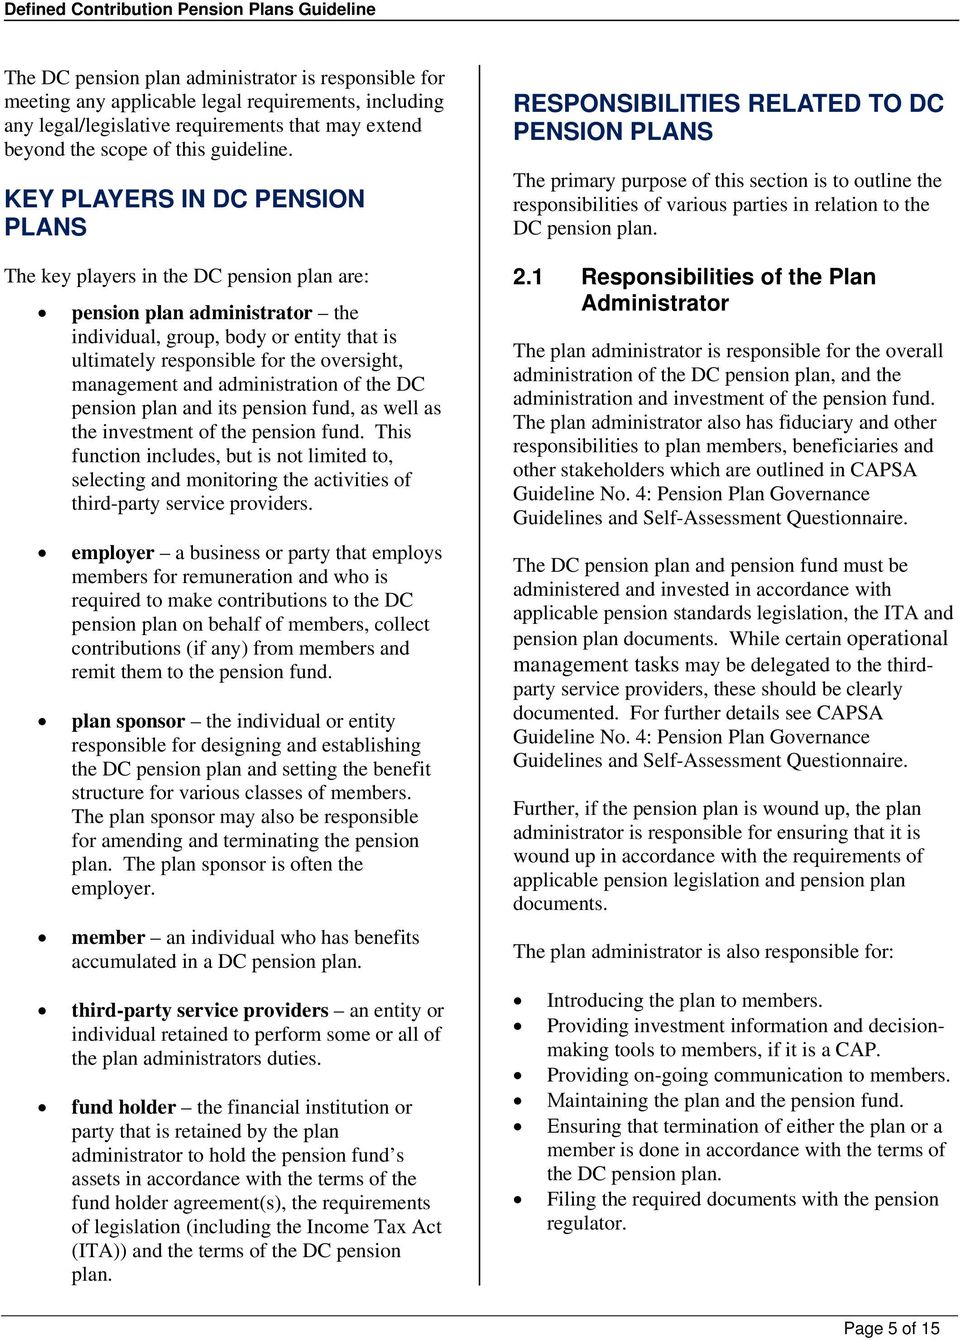 management and administration of the DC pension plan and its pension fund, as well as the investment of the pension fund.